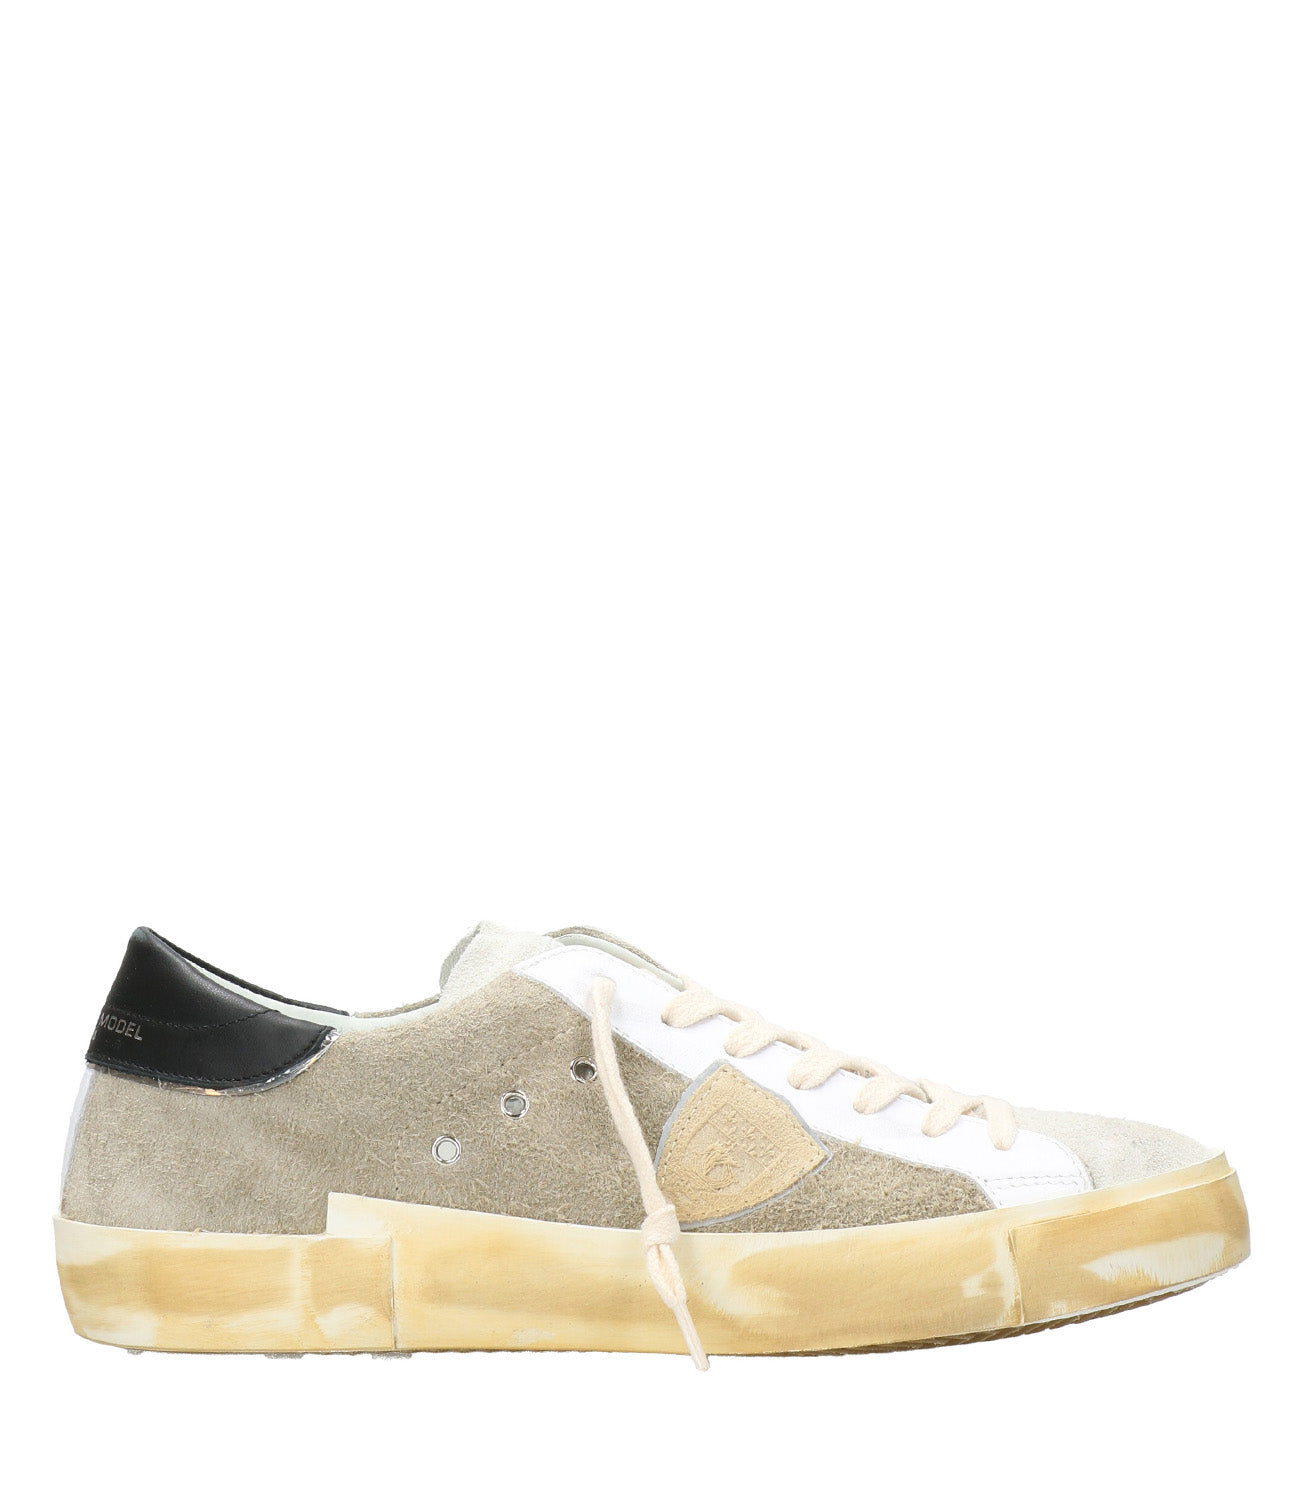 Philippe Model | PRSX Grey and White Sneakers